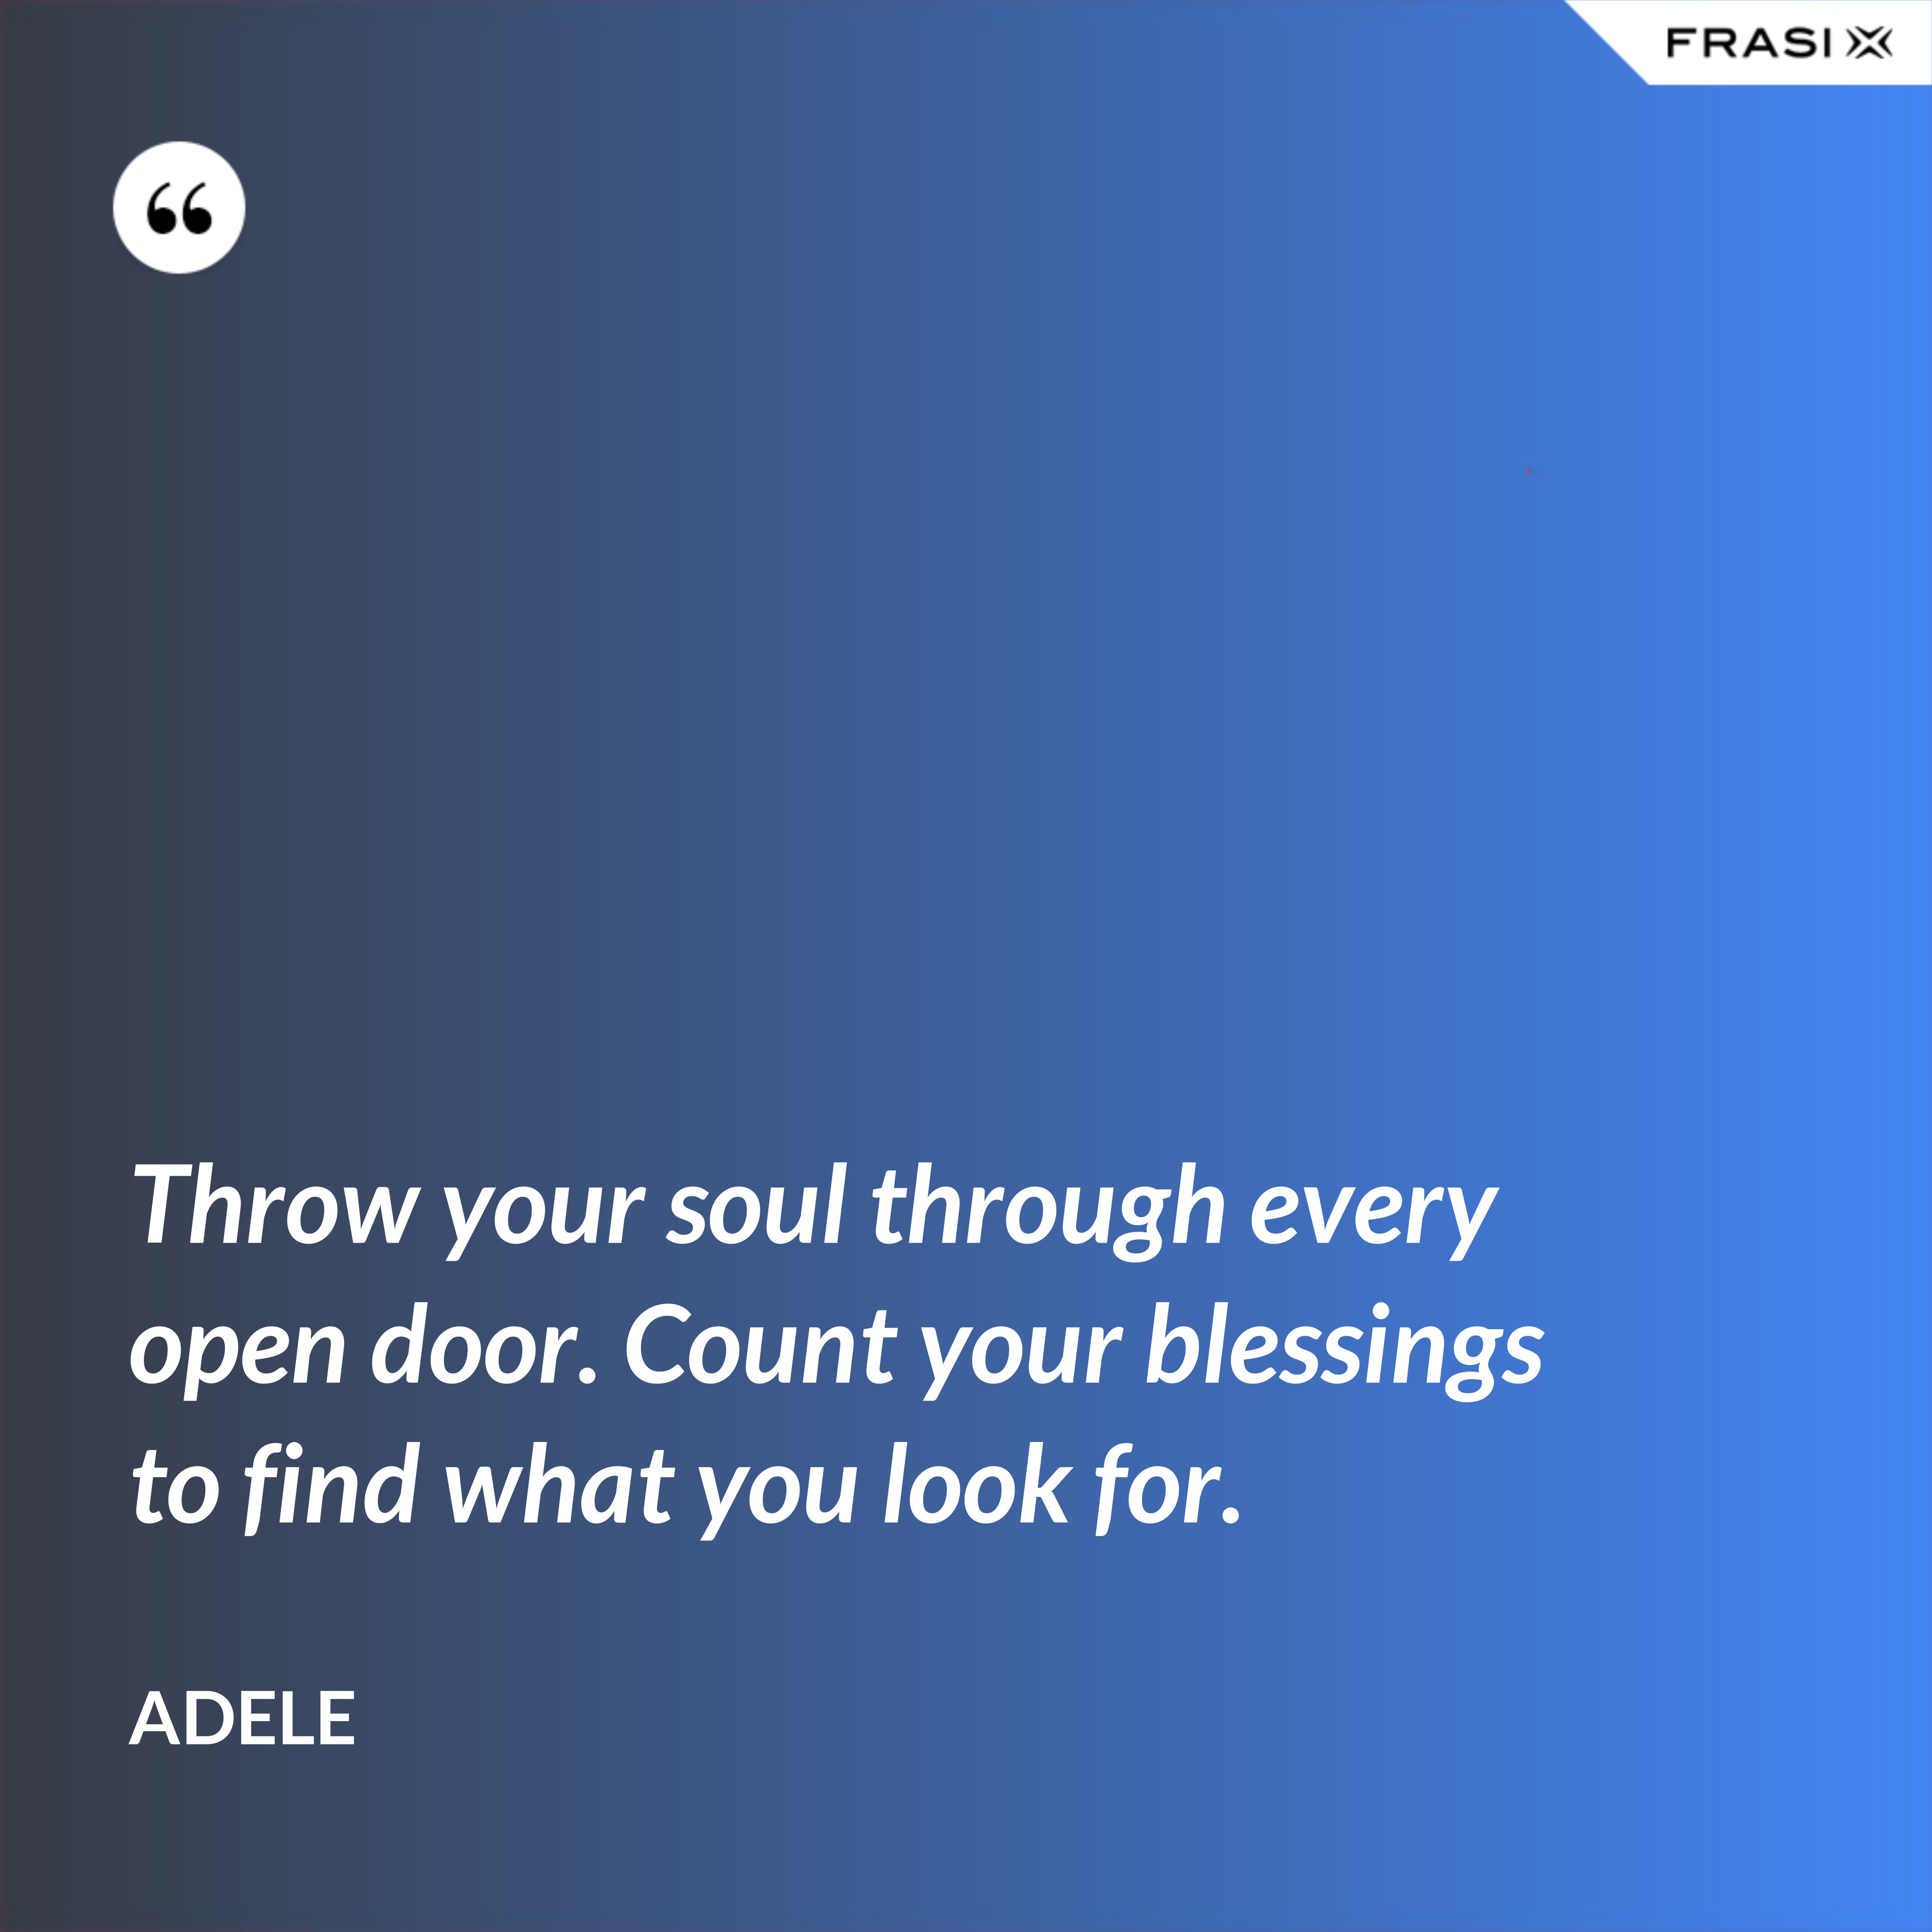 Throw your soul through every open door. Count your blessings to find what you look for. - Adele